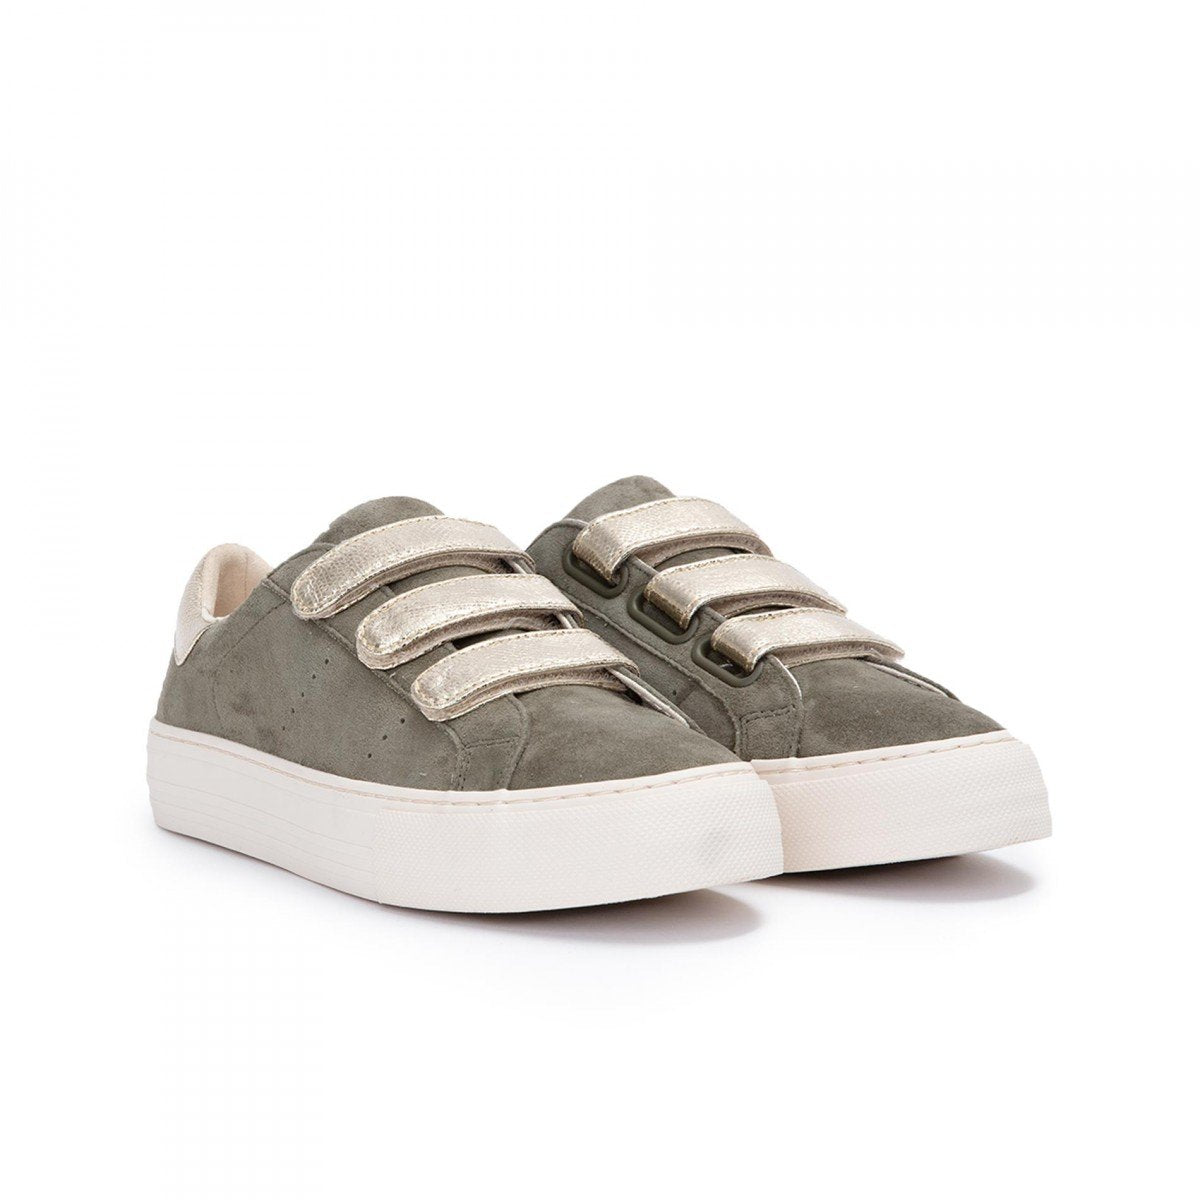 Arcade Straps Suede Foret Sneakers KNGDWI042L - 3